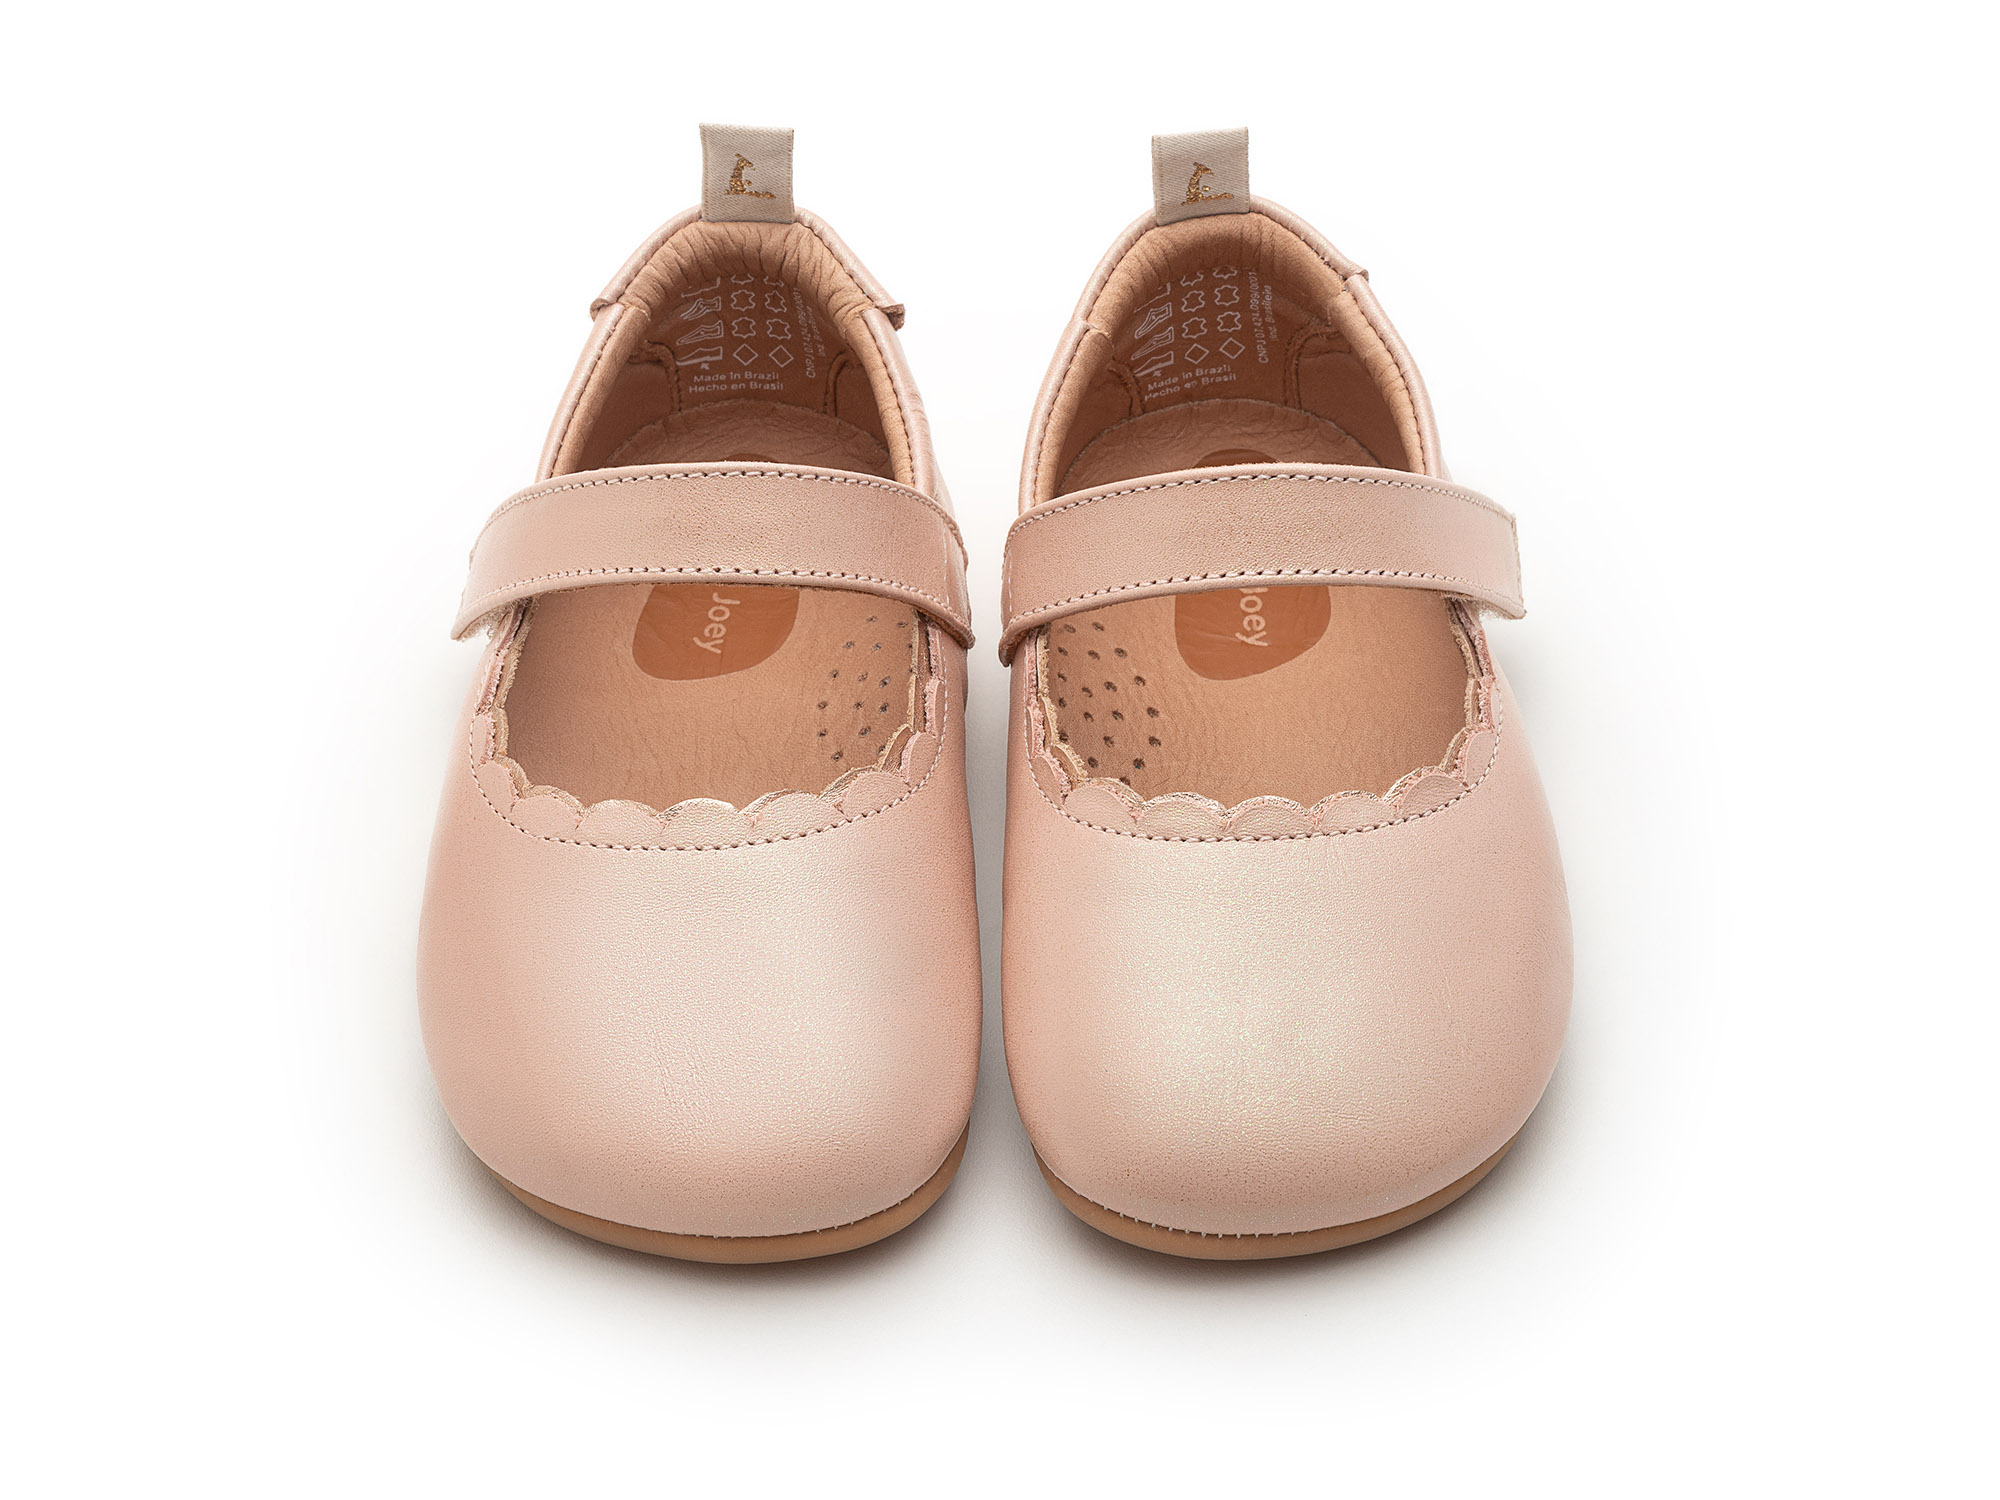 UP & GO Mary Janes for Girls Roundy | Tip Toey Joey - Australia - 6